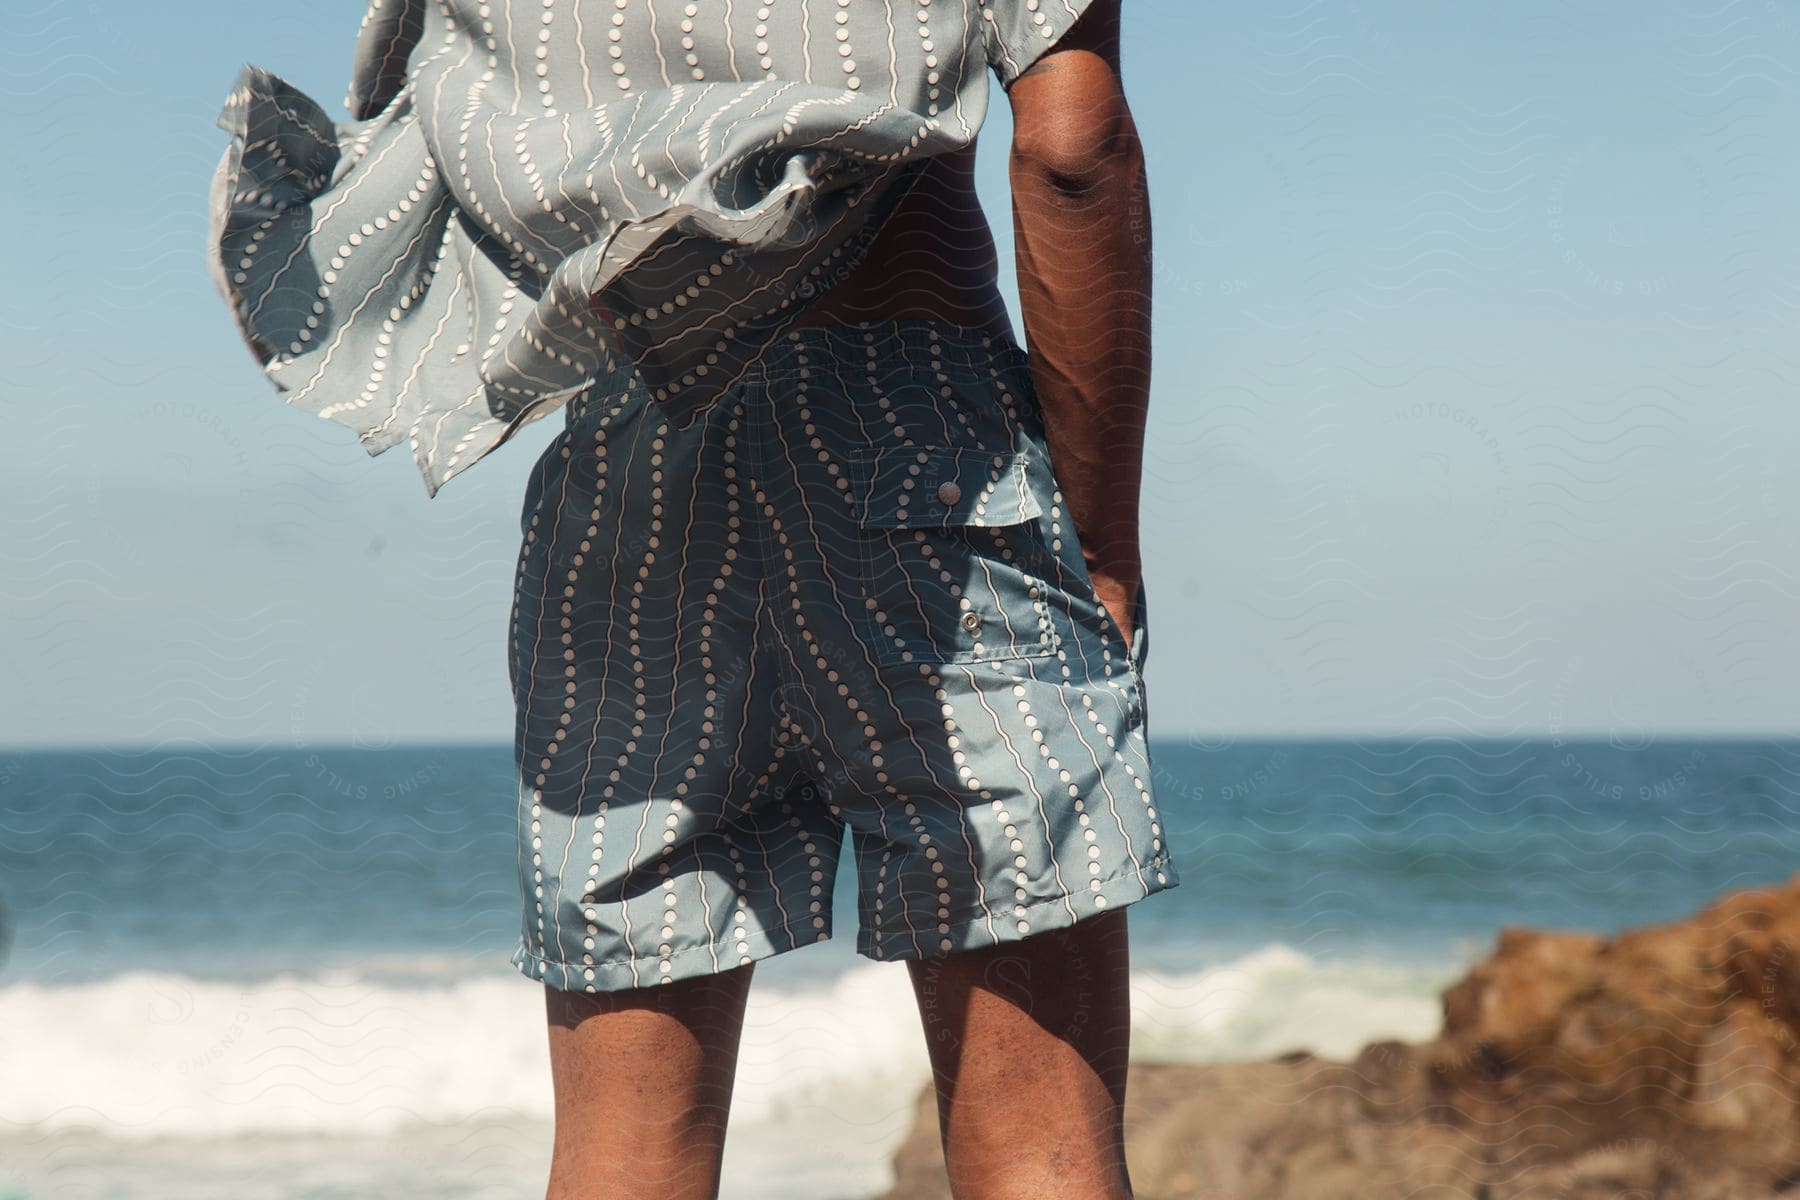 Man standing on the beach wearing shorts against a clear blue sky.